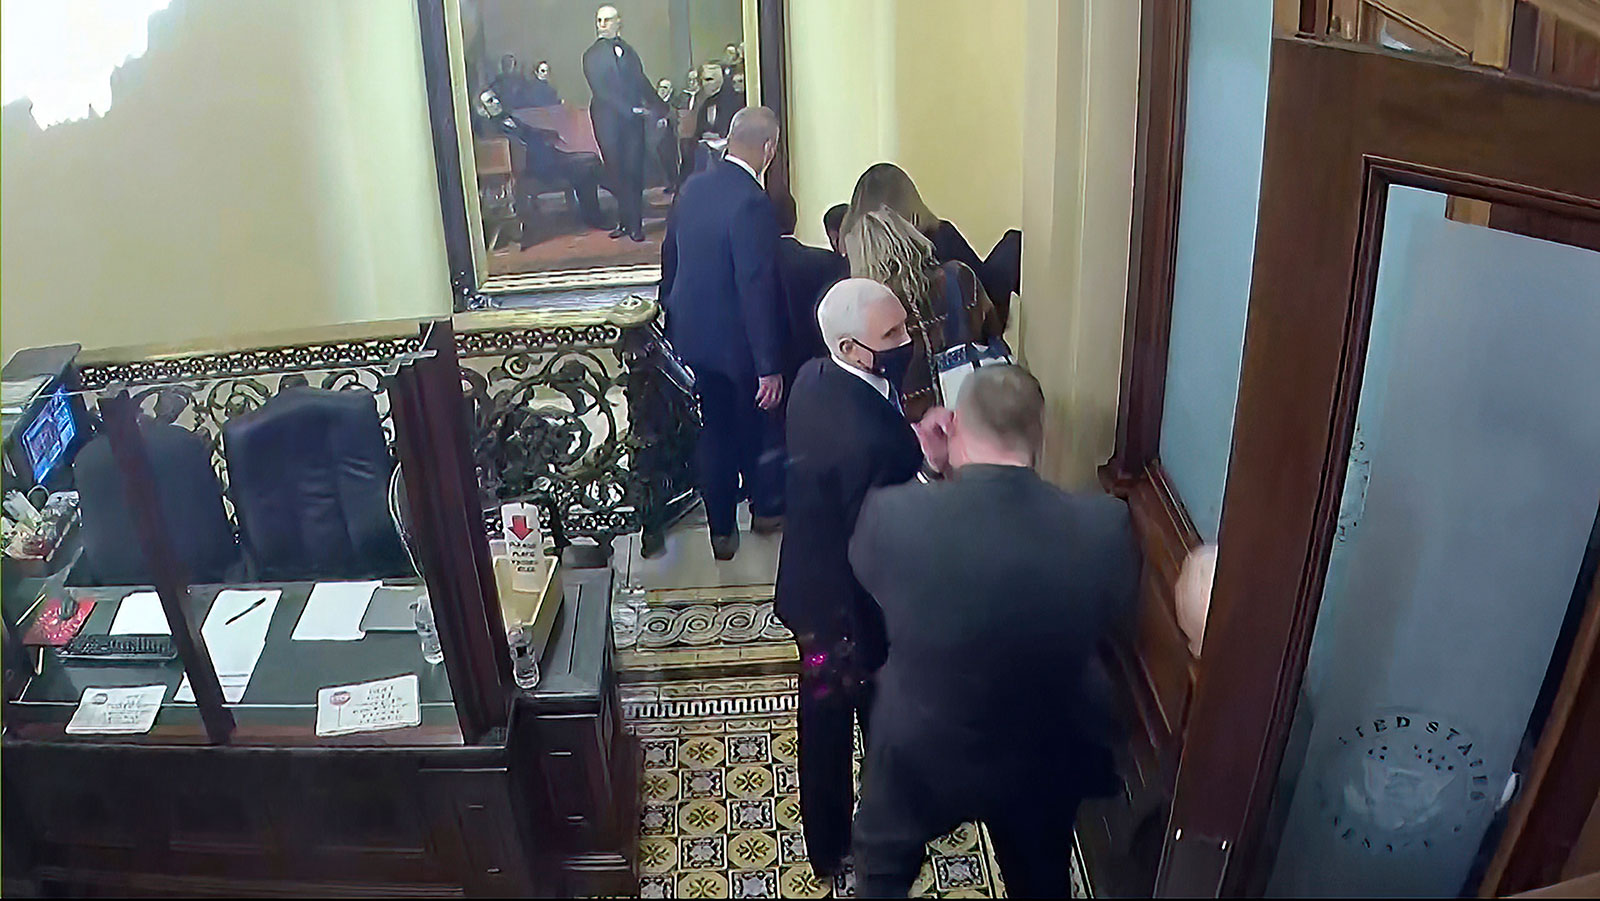 Then-Vice President Mike Pence is evacuated down the stairs of the US Capitol on January 6, 2021.